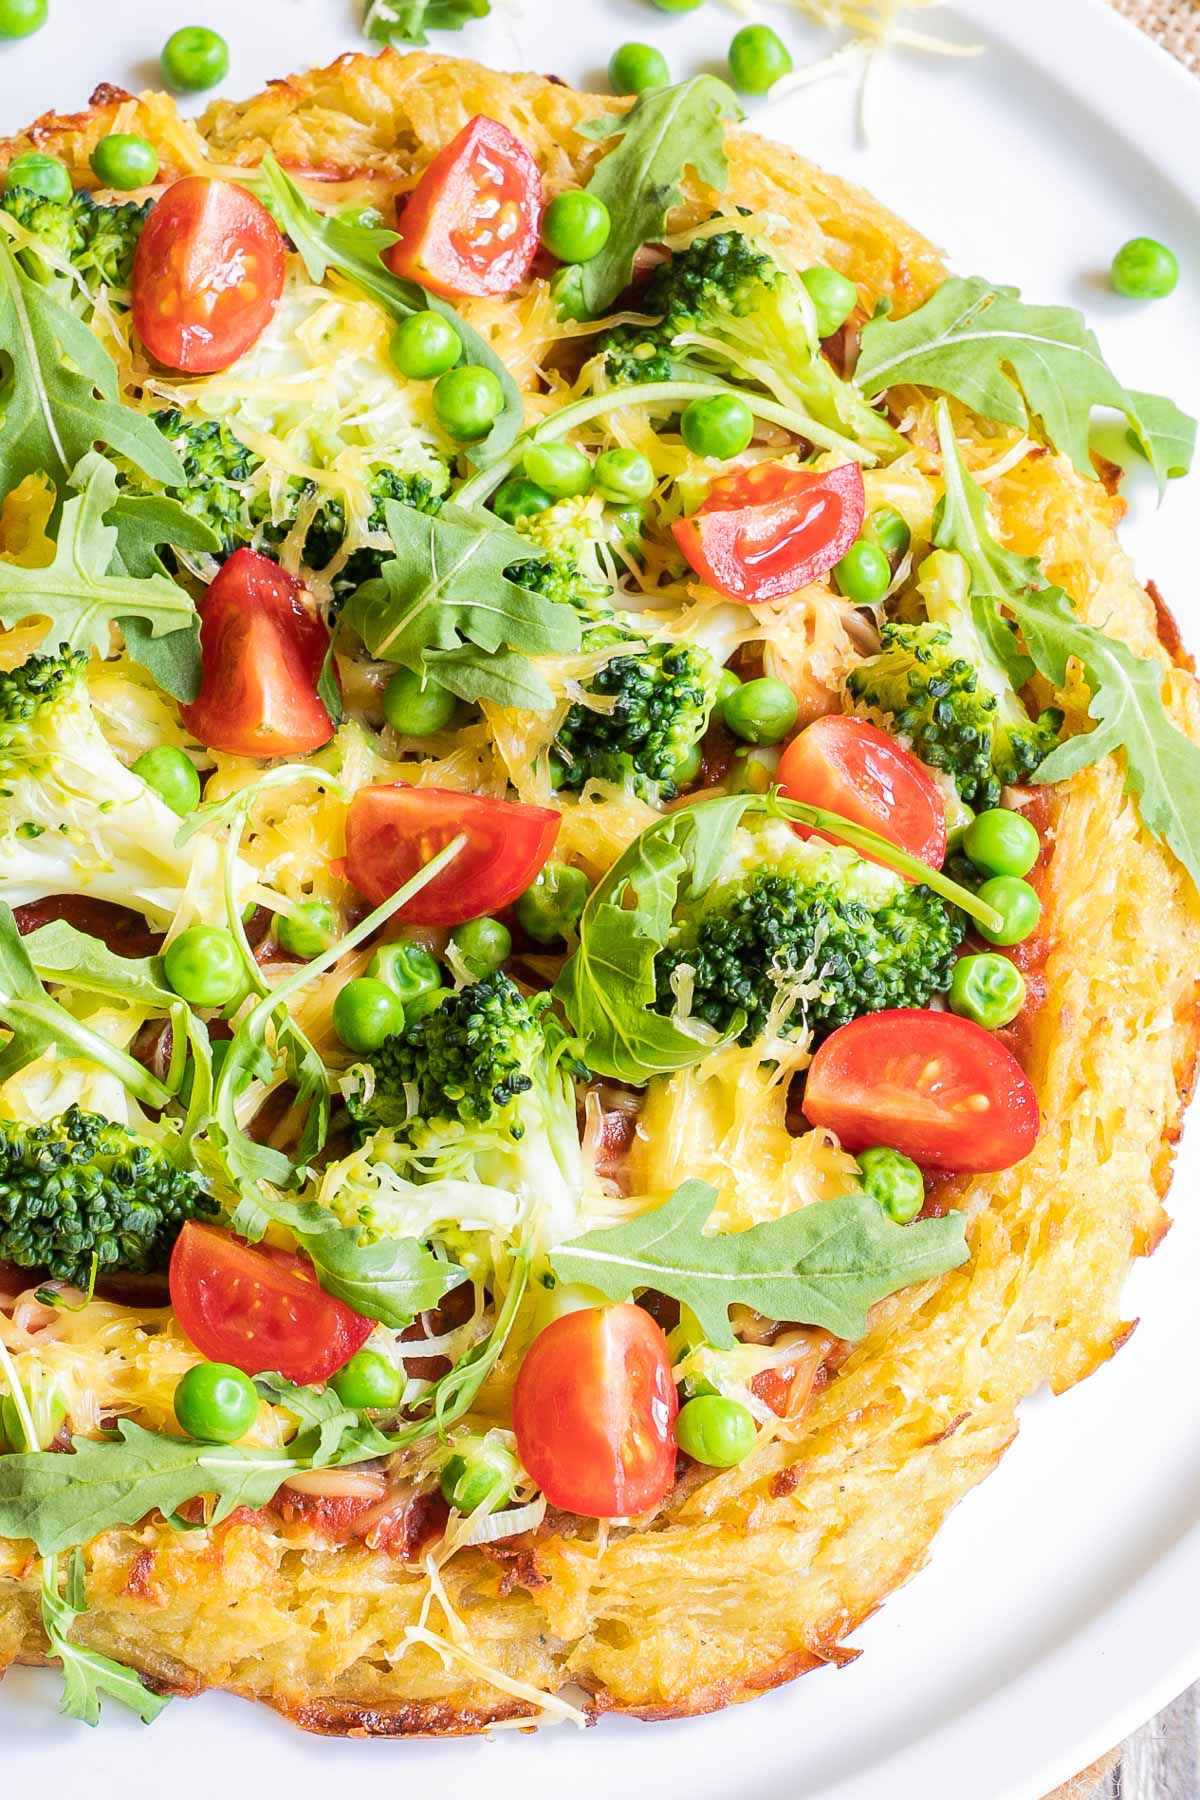 Hash brown crust pizza with topped with tomato sauce, broccoli, peas cherry tomatoes, arugula, and shredded melted cheese. Served on a white plate.